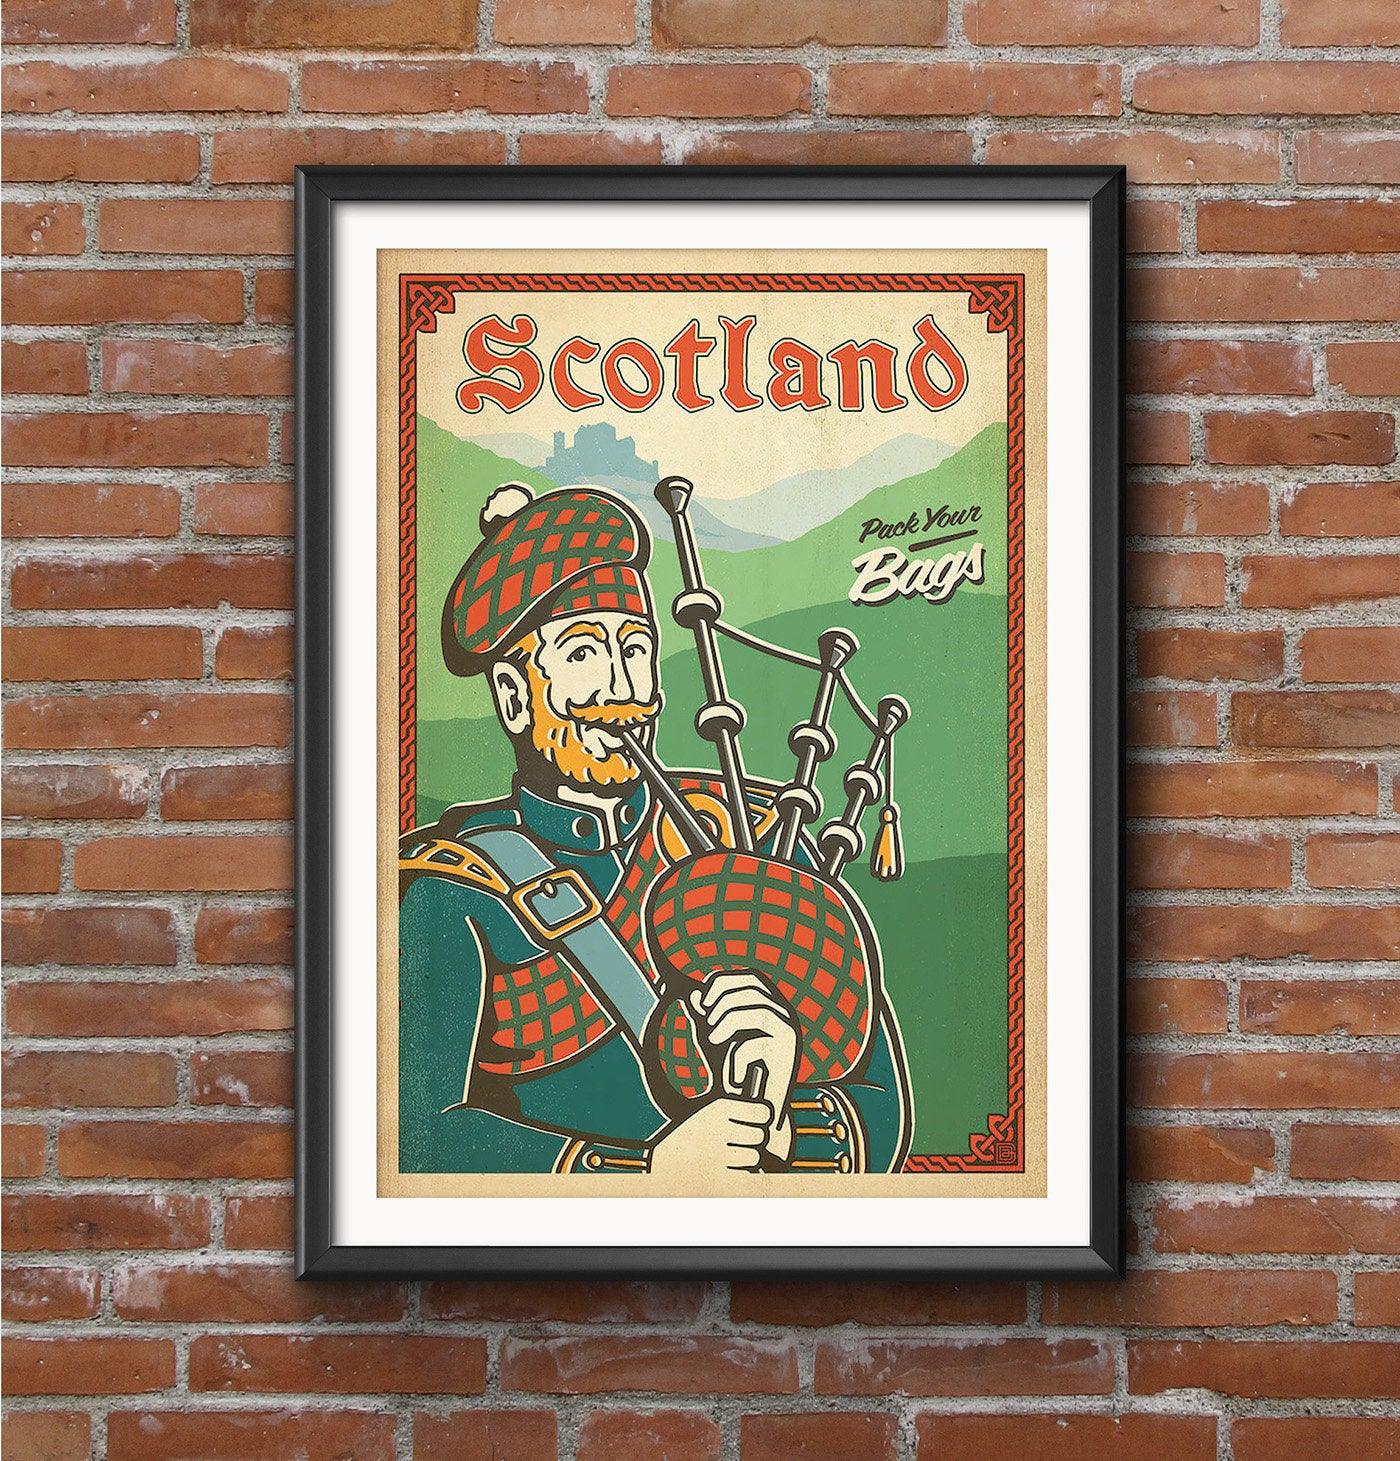 SCOTLAND - Vintage Travel Poster - Classic Posters